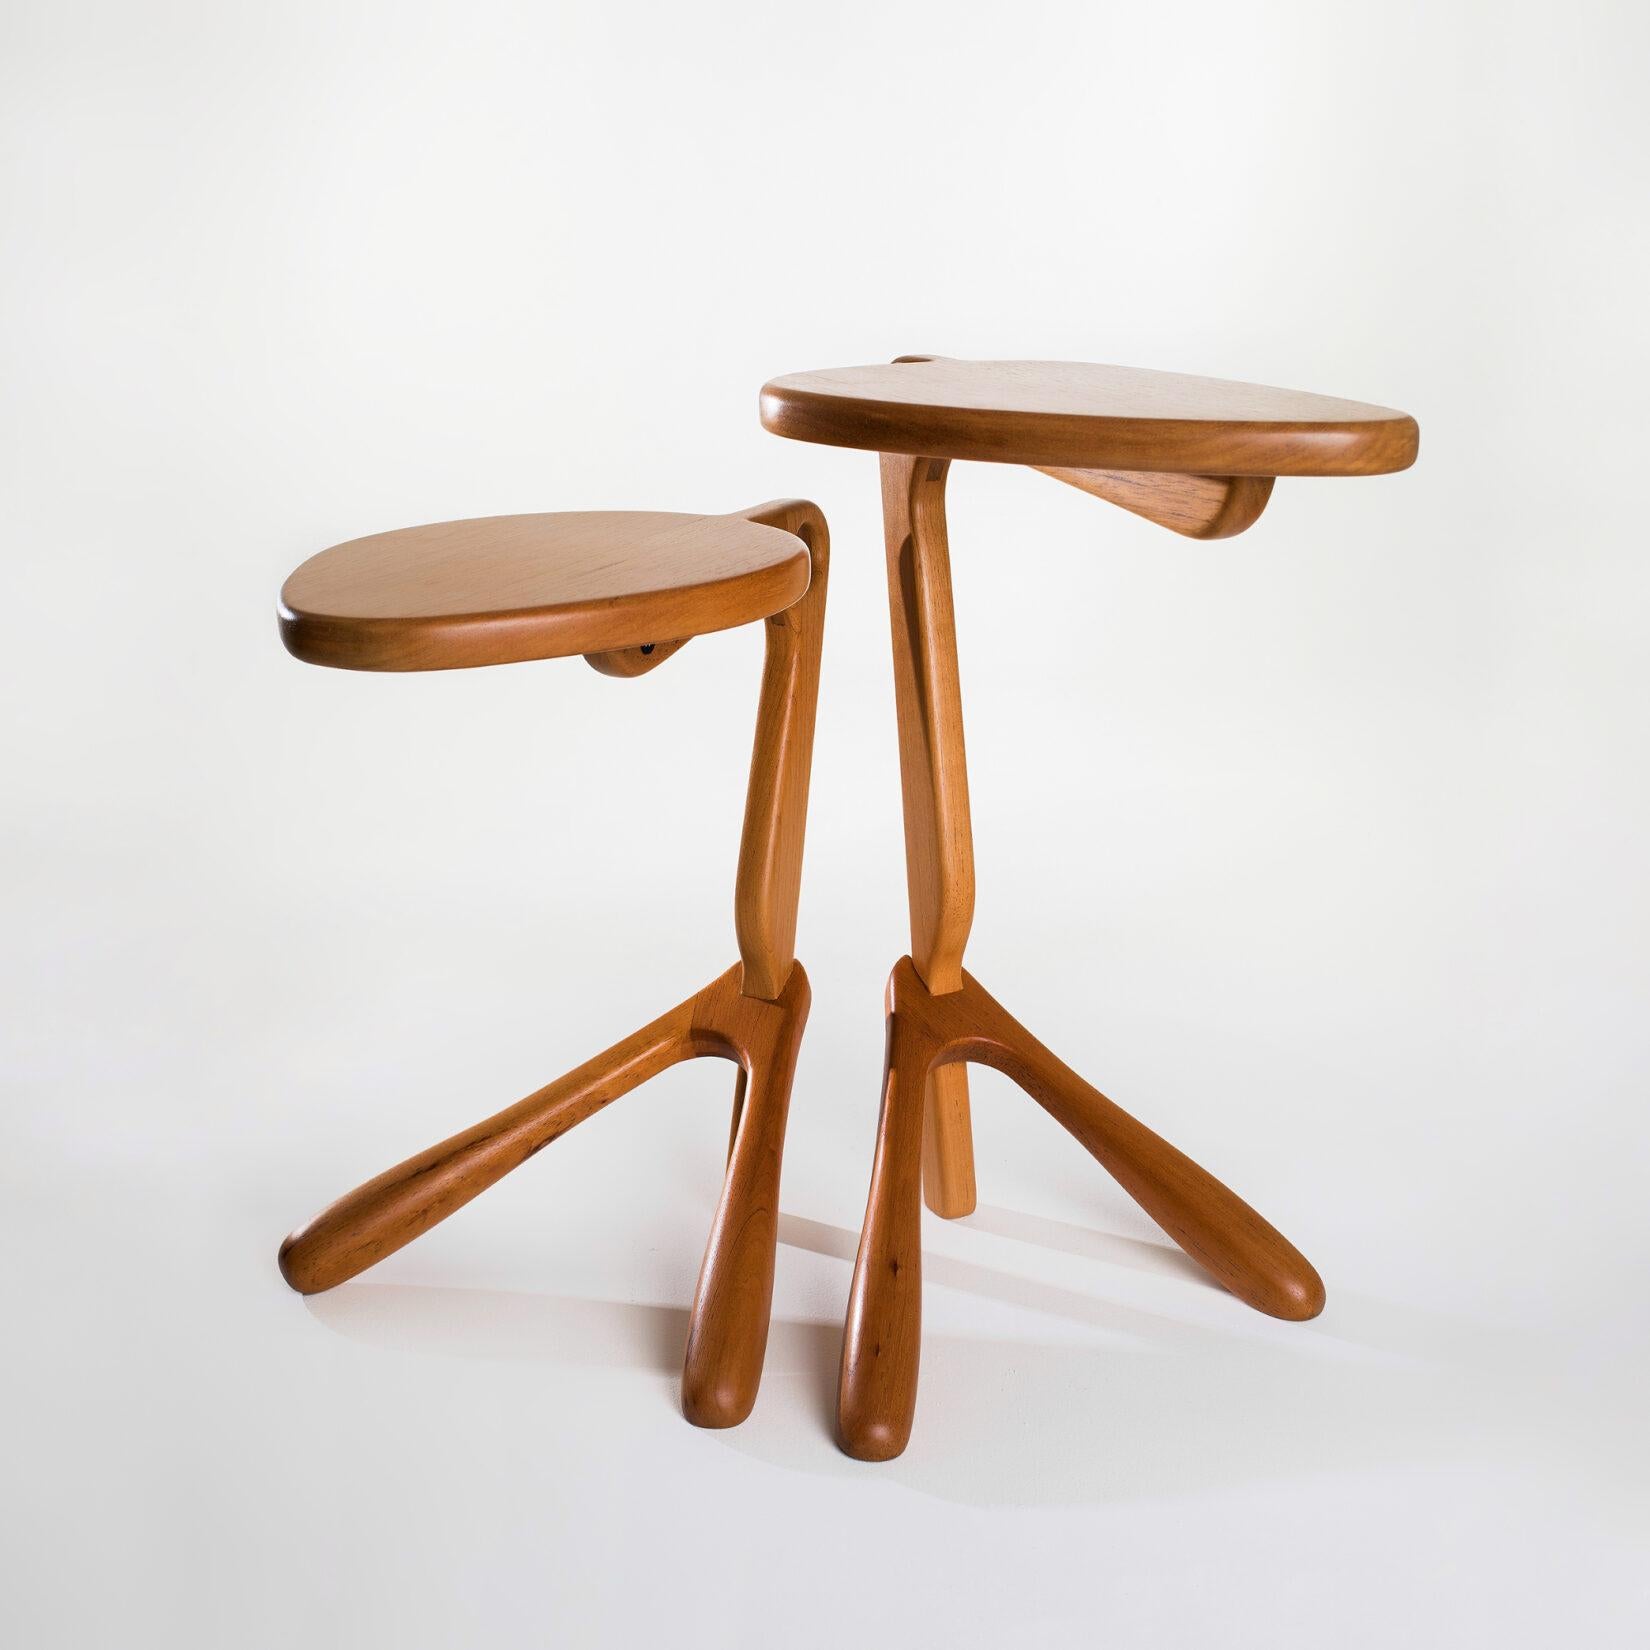 Organic Form Side Table - Broto, MEDIAN size Light Brown Finish Wood In New Condition For Sale In São Paulo, BR